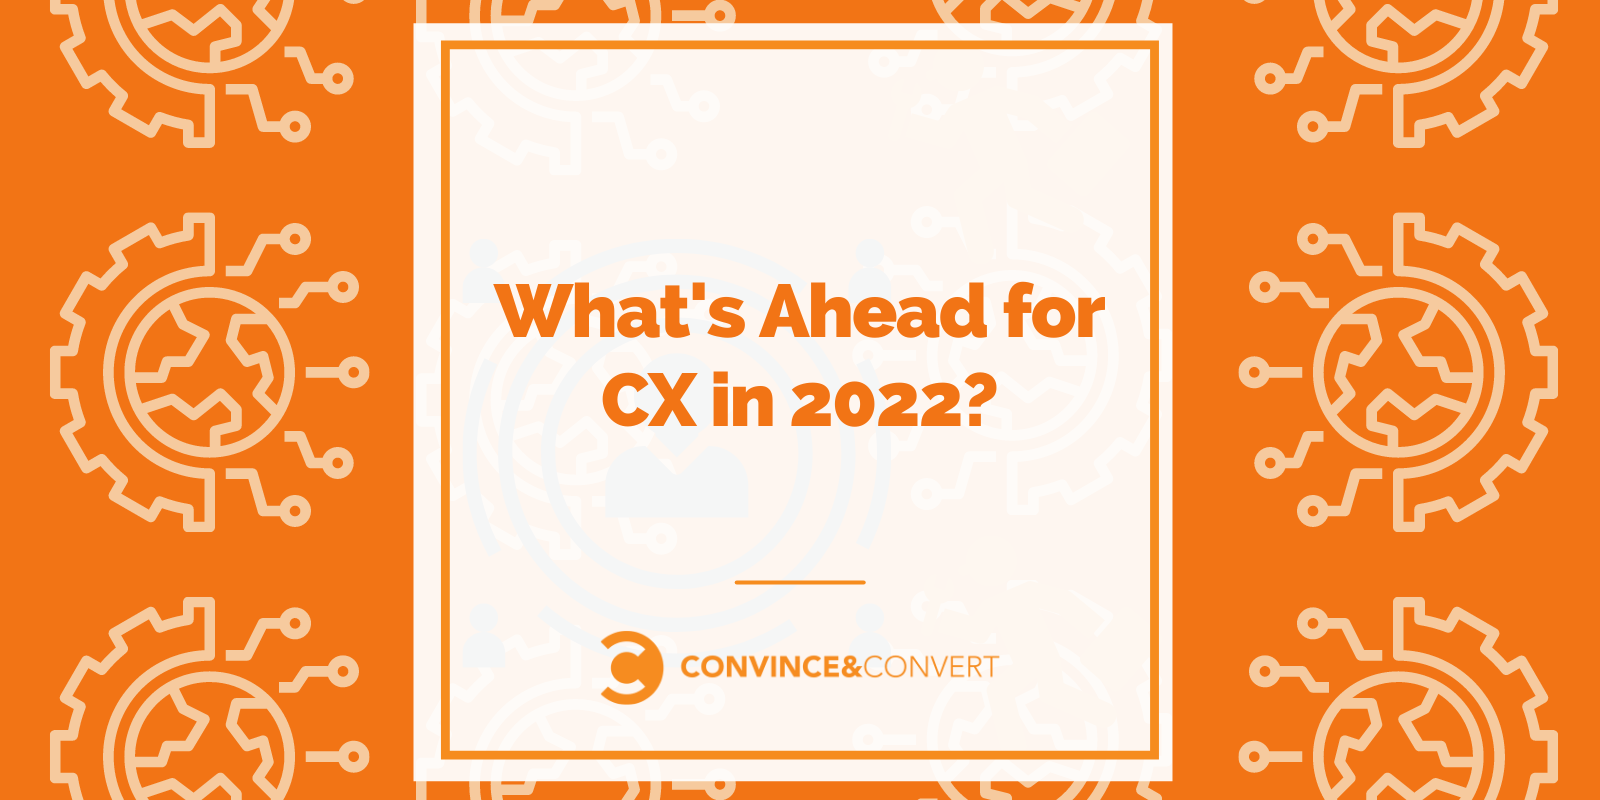 What’s Forward for CX in 2022?